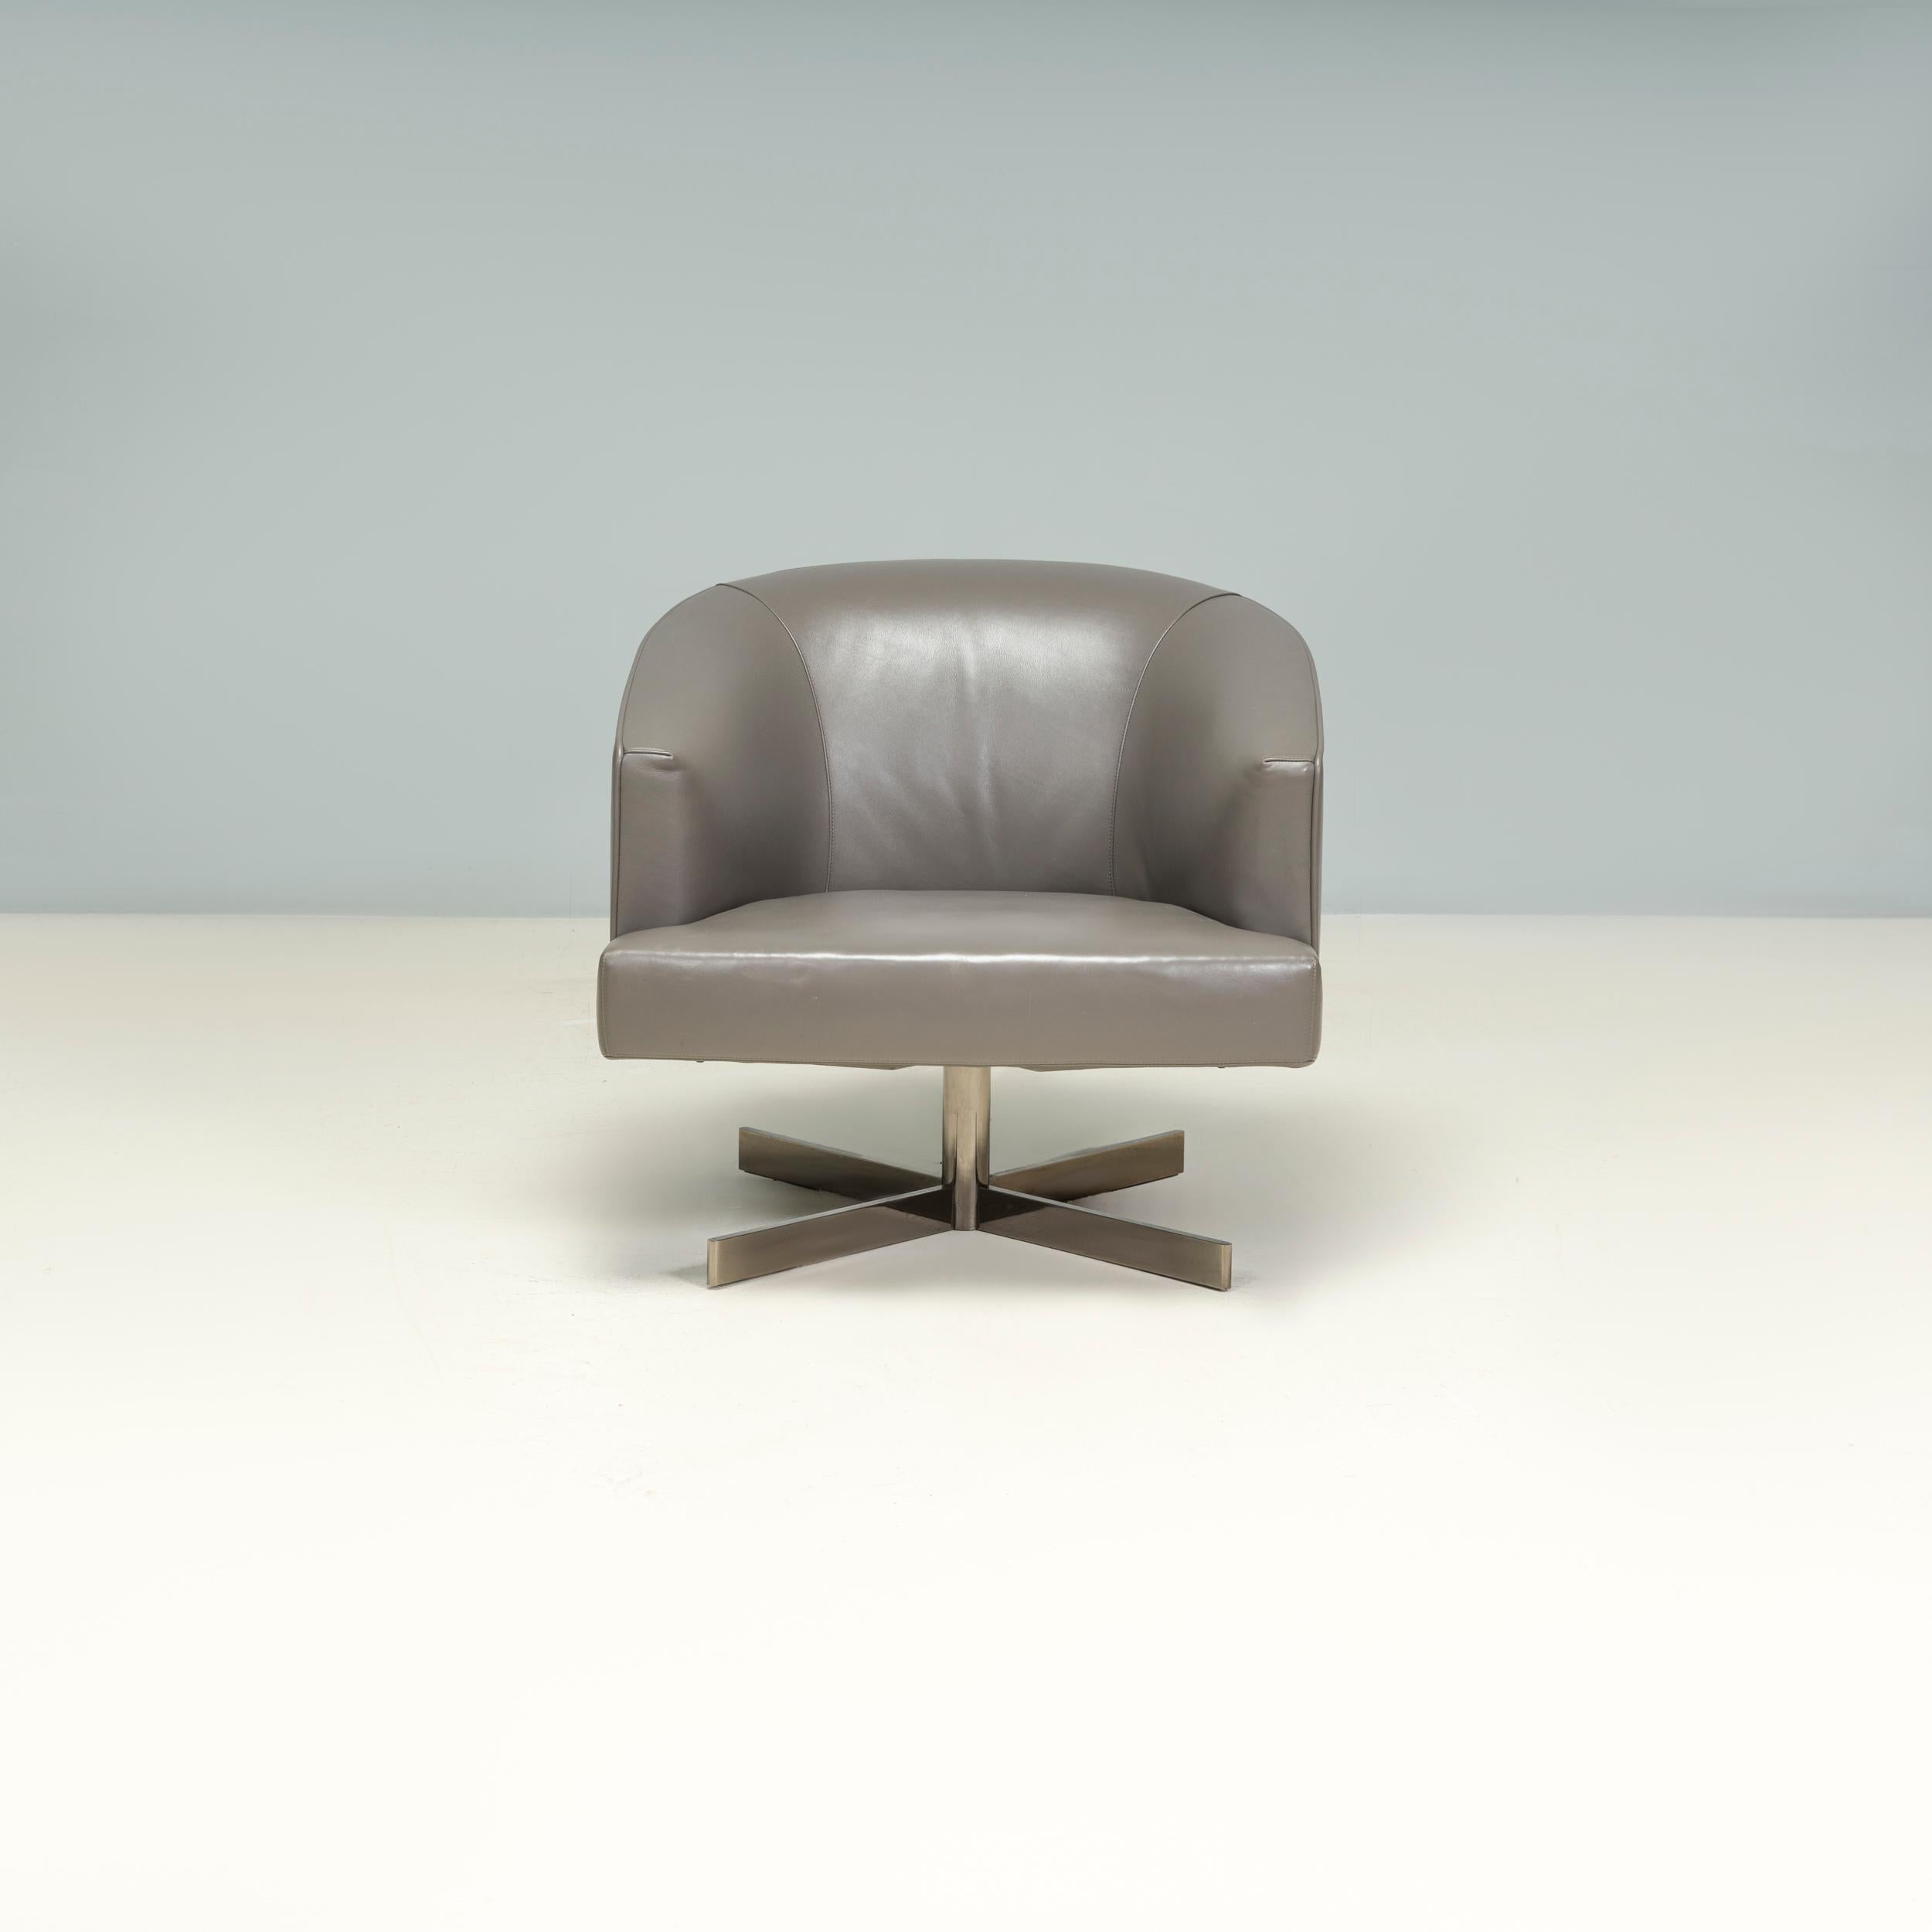 Designed by Rodolfo Dordoni for Minotti, the Martin armchair is a fantastic example of elegant contemporary Italian design.

Featuring a square seat cushion and softly curved backrest, the chair is fully upholstered in a grey leather.

The seat sits